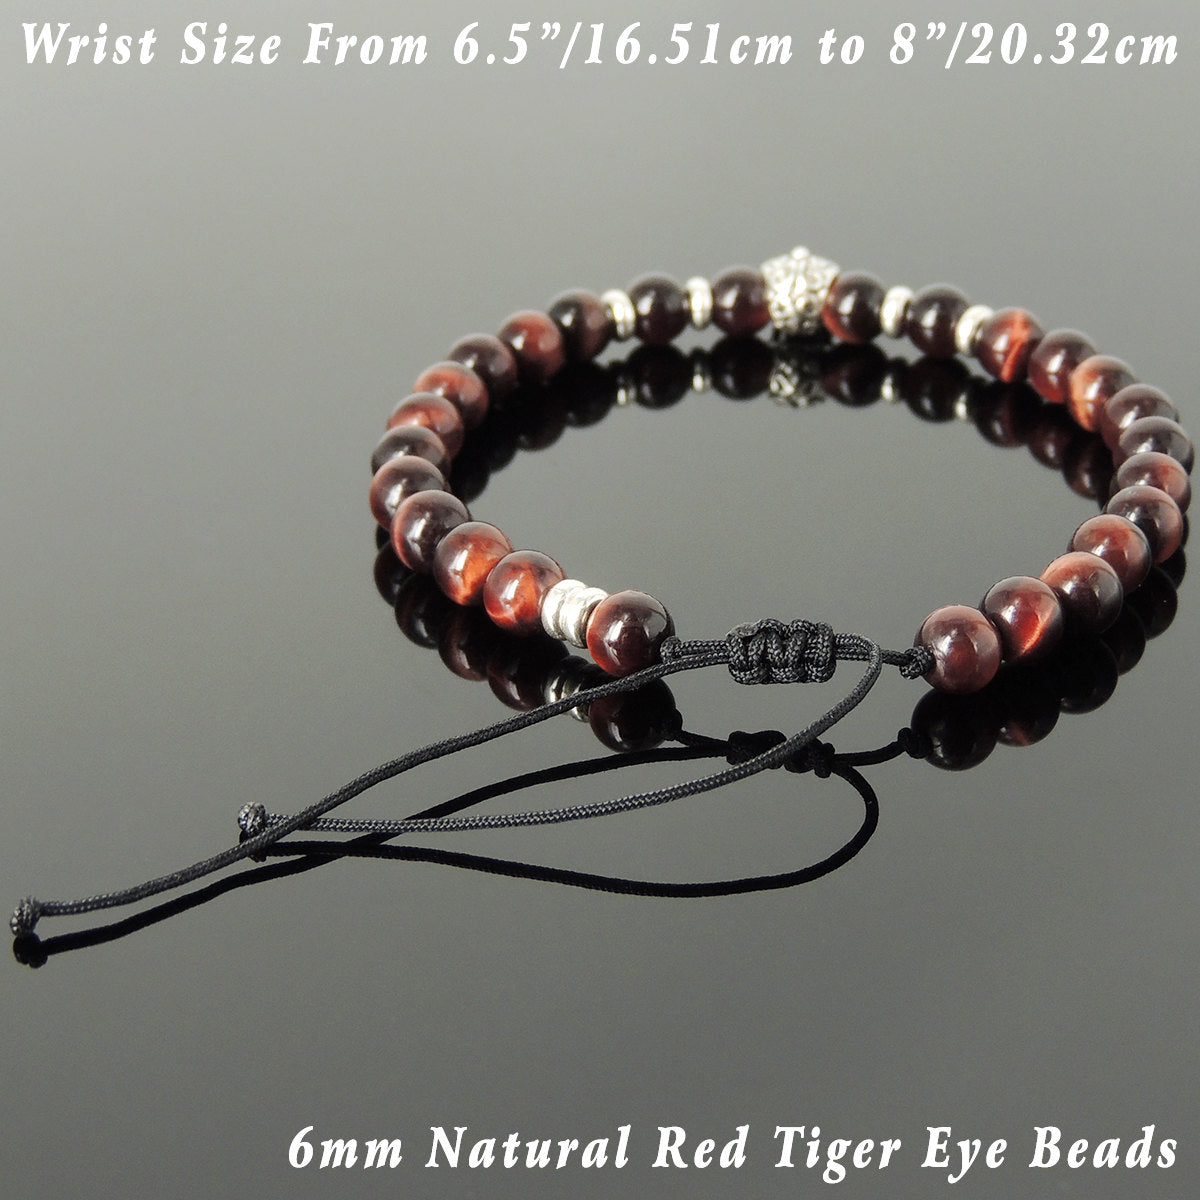 6mm Red Tiger Eye Adjustable Braided Gemstone Bracelet with S925 Sterling Silver Spacers & Day of the Dead Skull Bead - Handmade by Gem & Silver BR1081